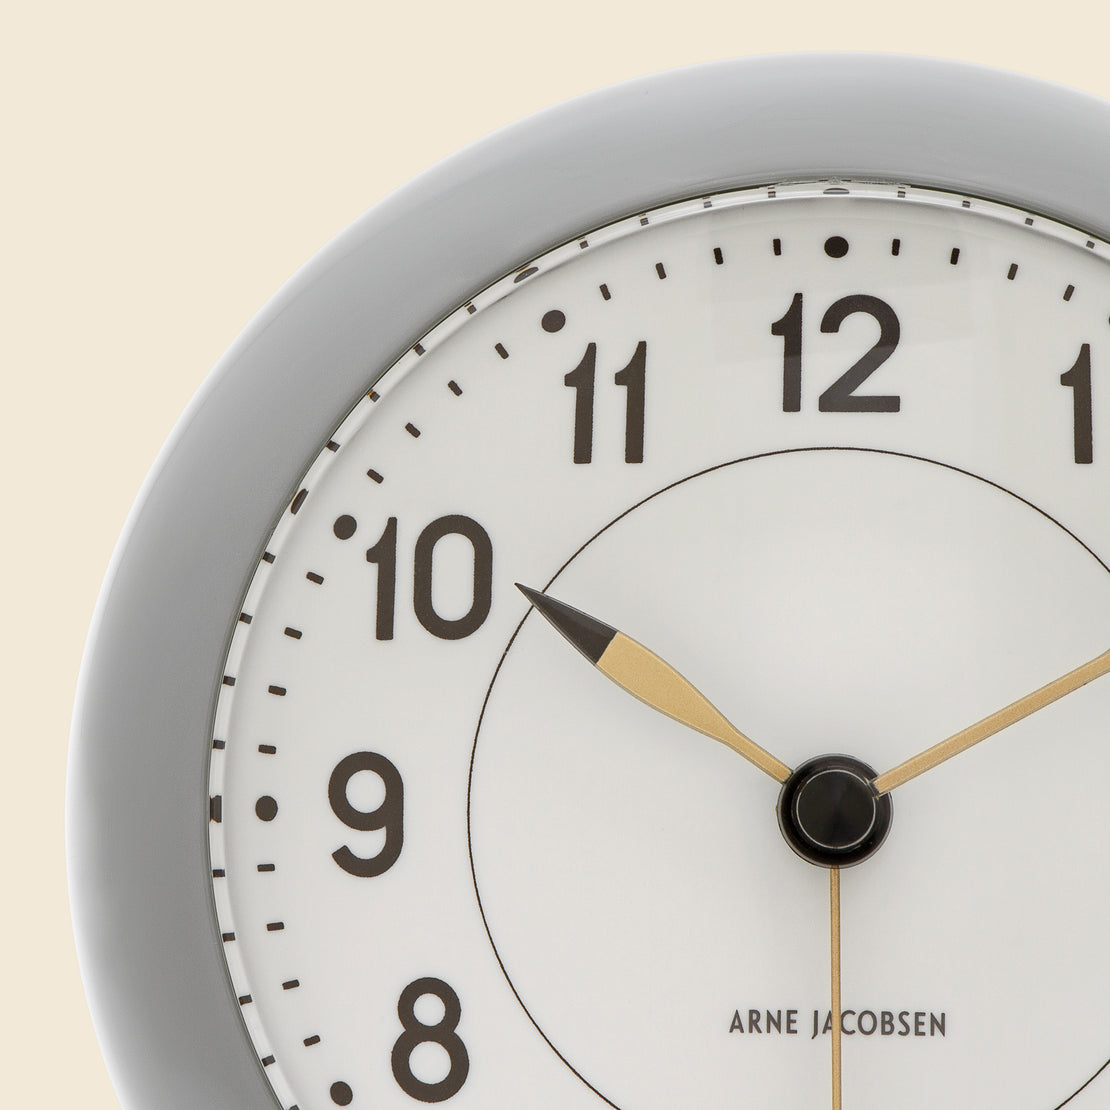 Grey Station Alarm Clock - Arne Jacobsen - STAG Provisions - Home - Office - Clock